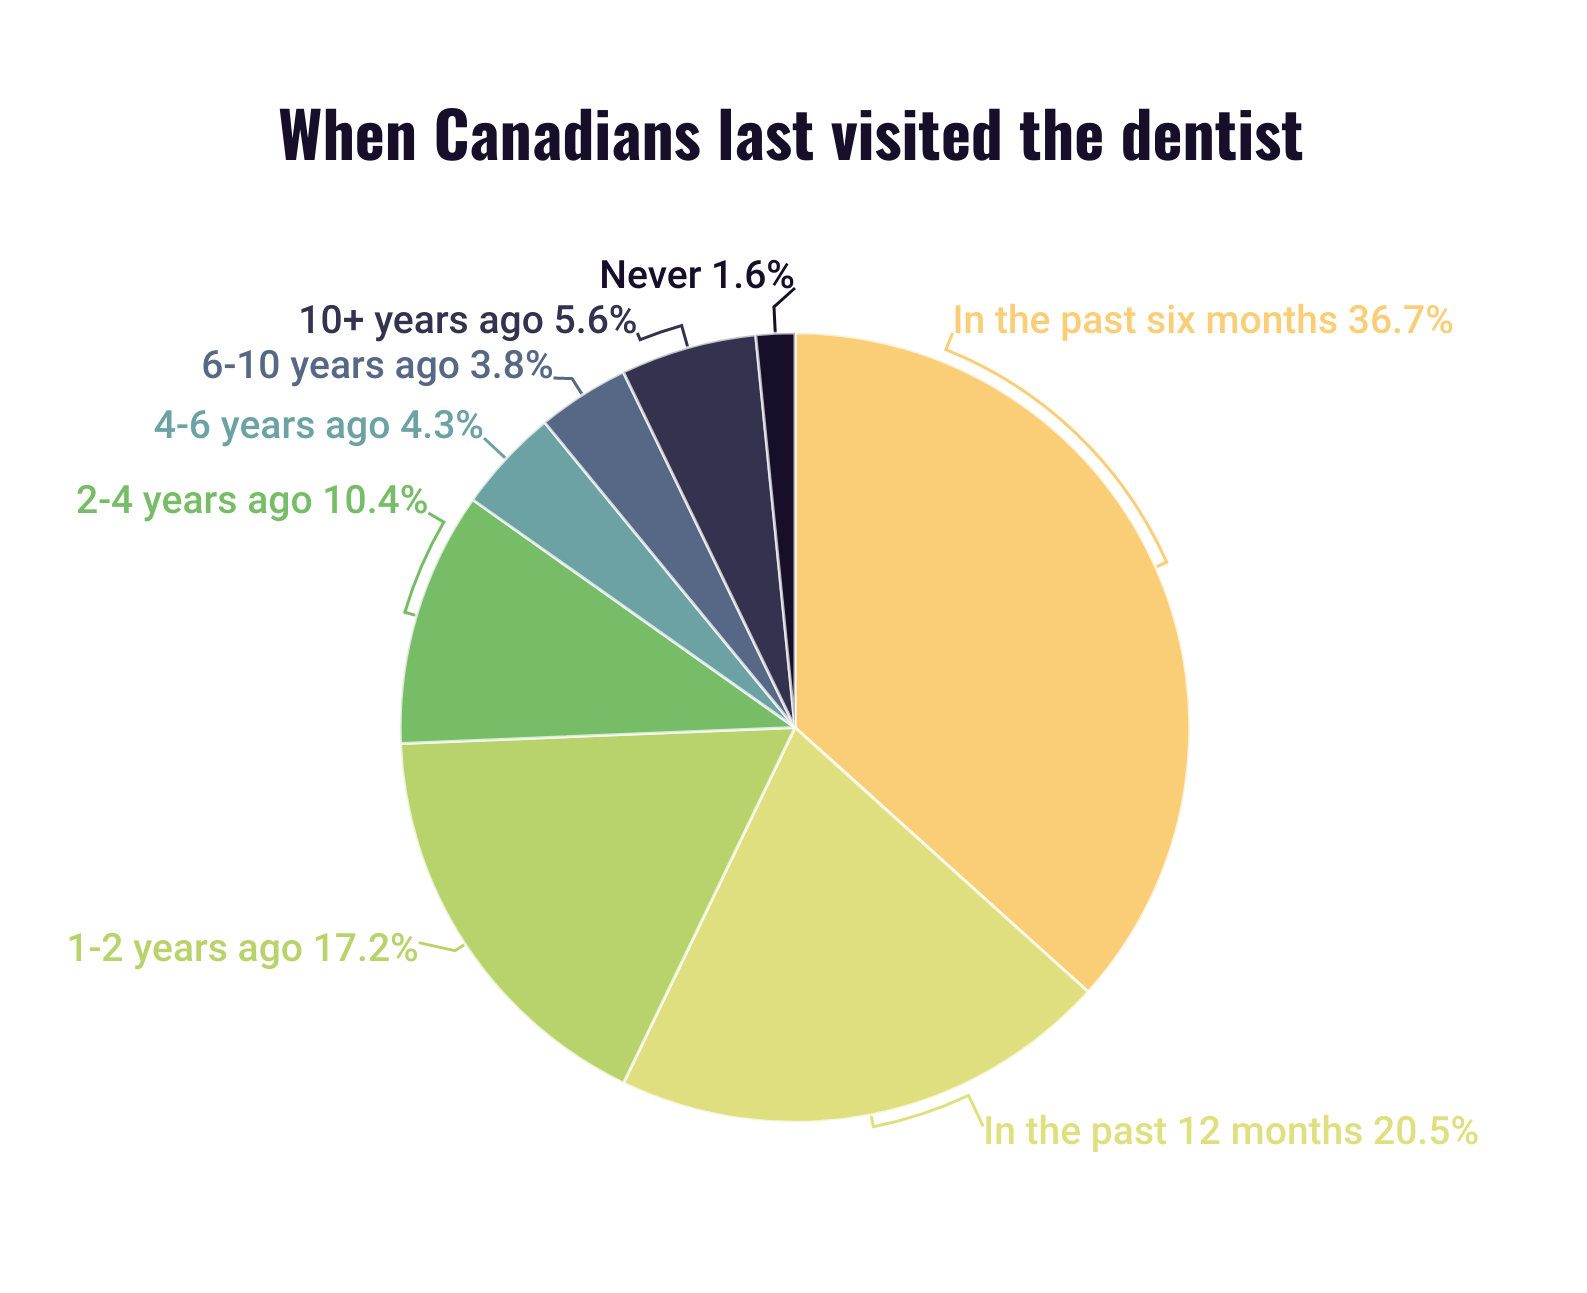 Graph showing when Canadians last visited the dentist.